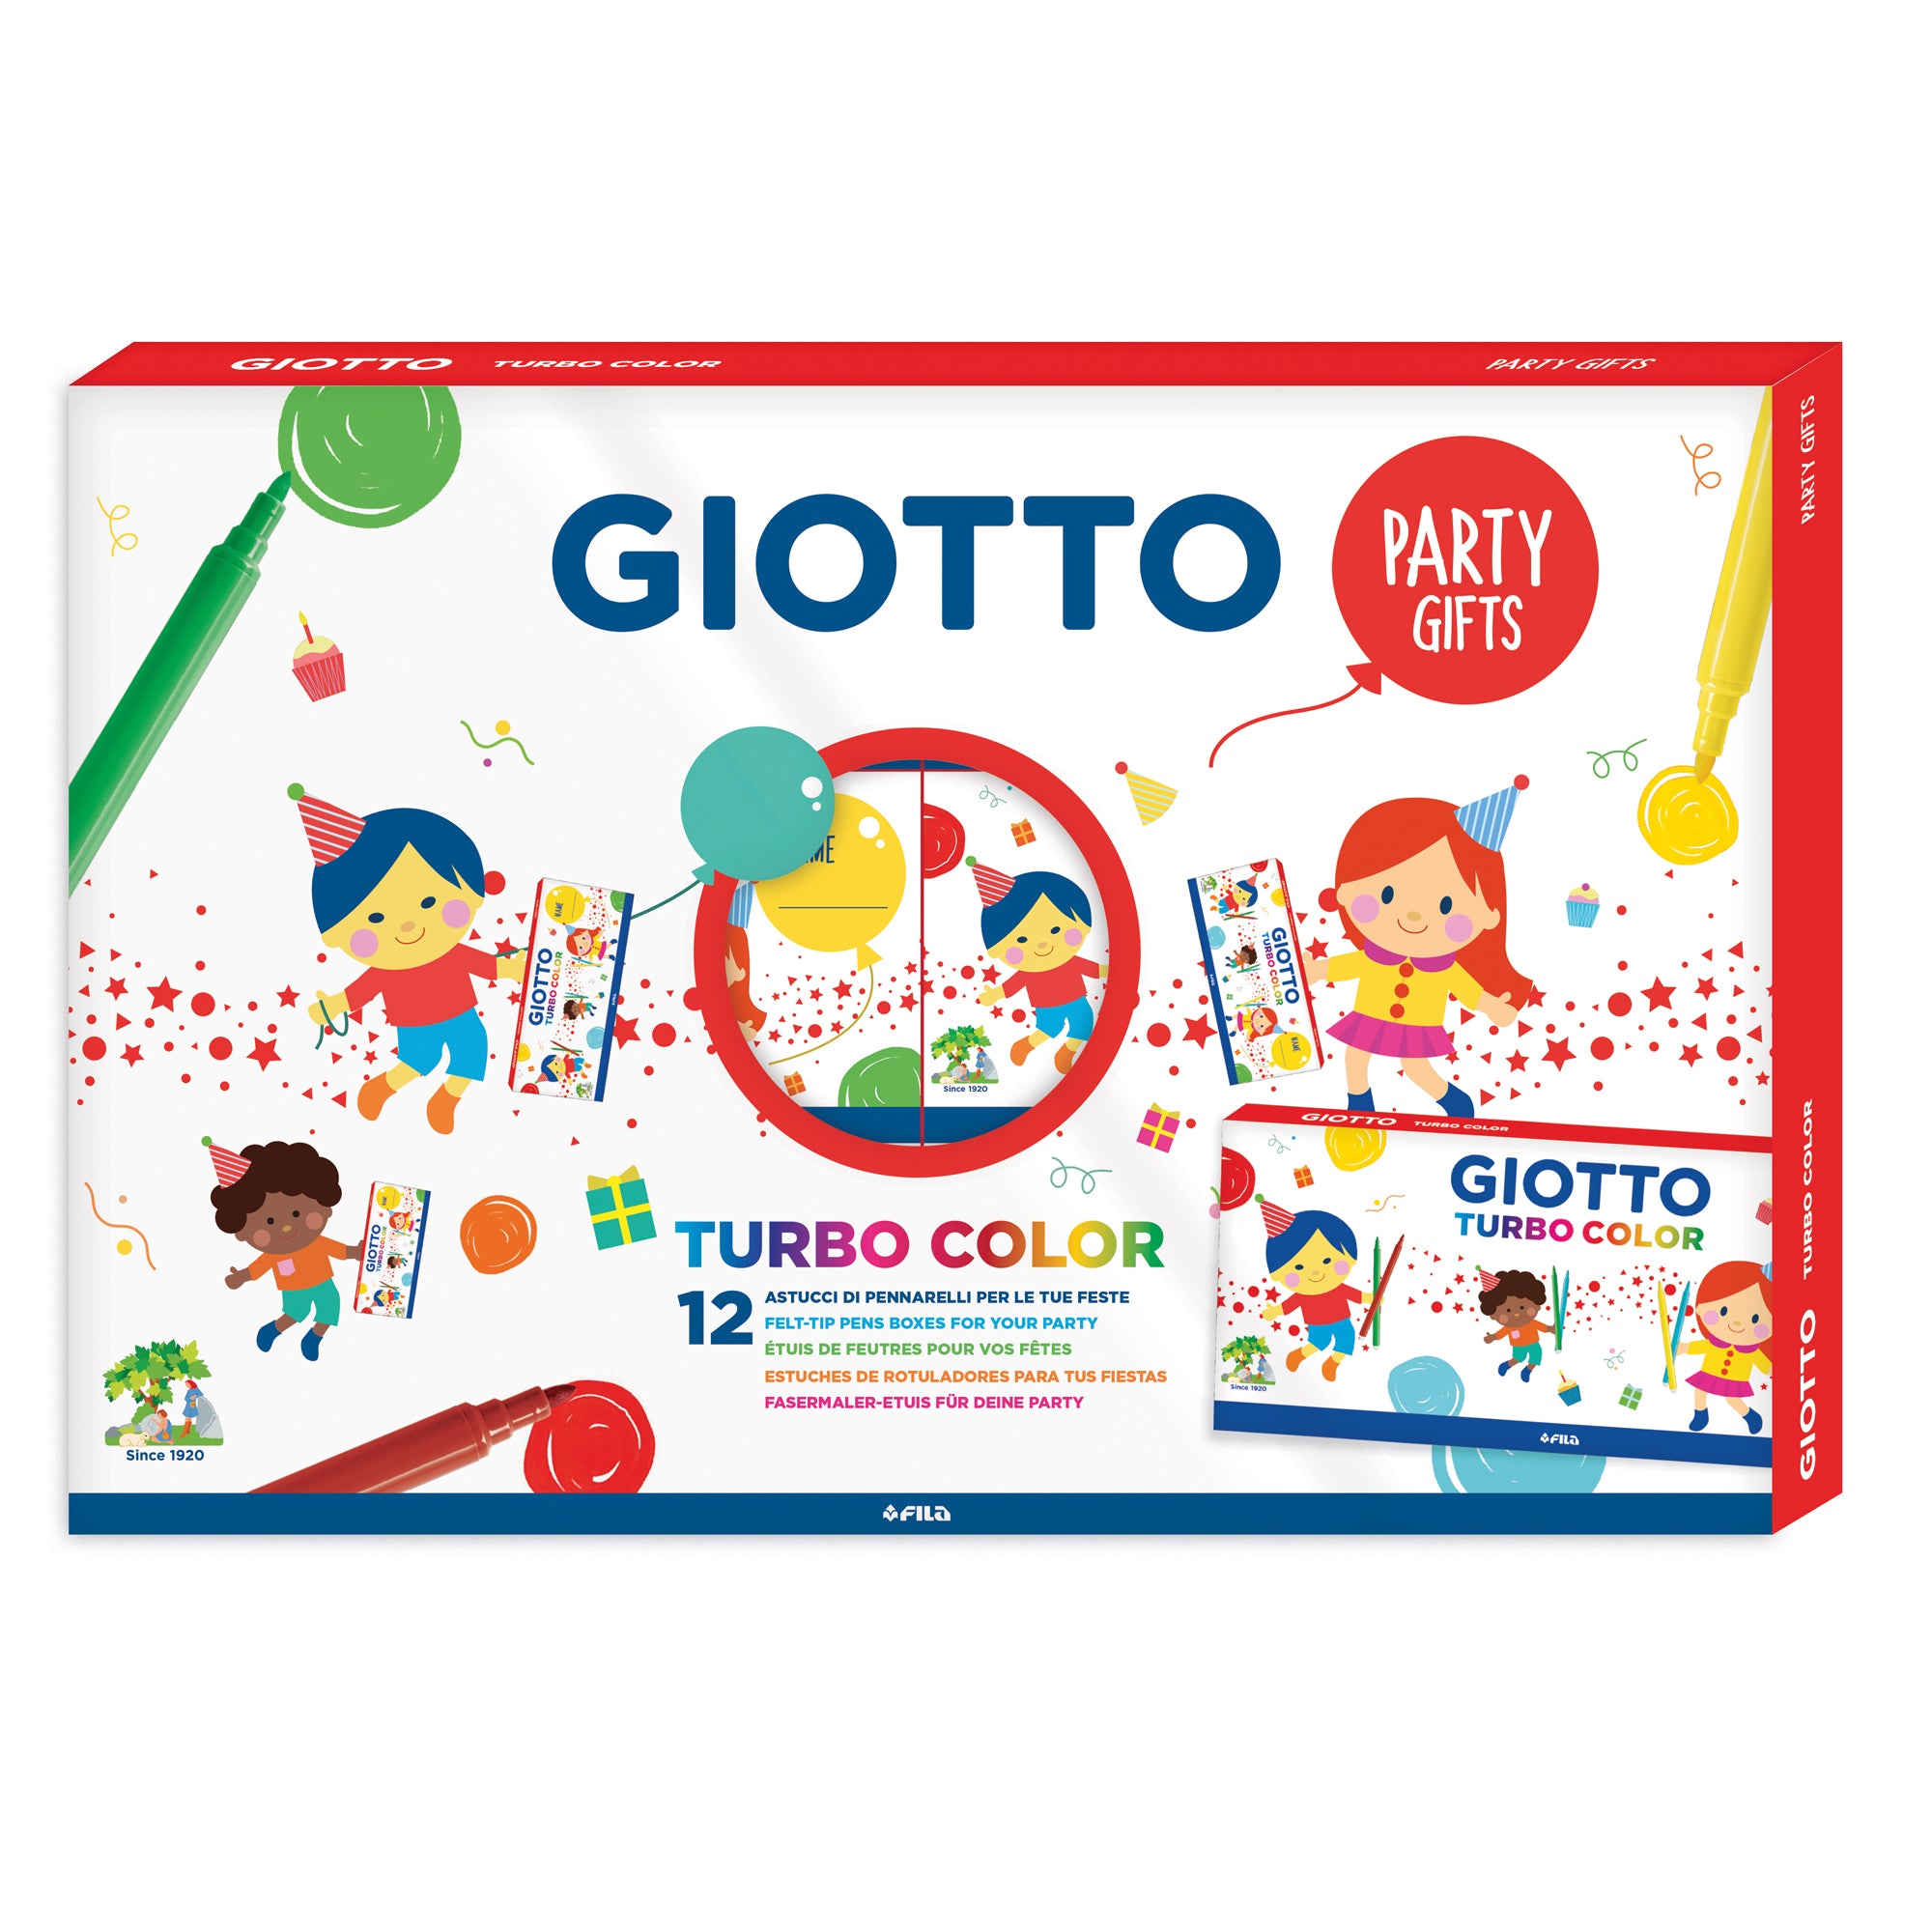 giotto-set-12-astucci-6-pennarelli-turbo-color-party-gifts